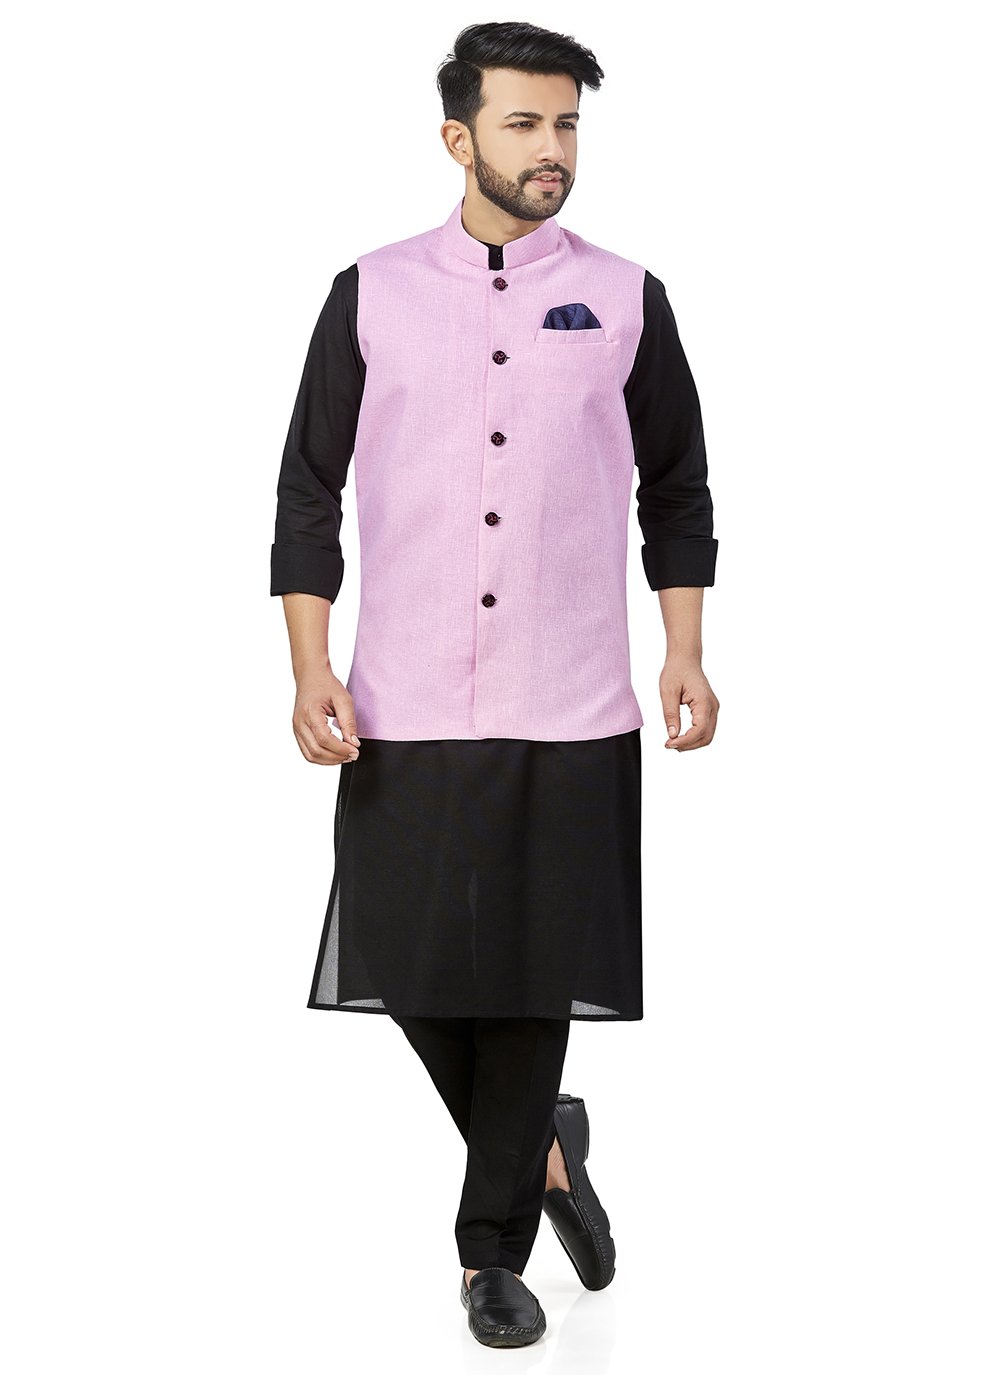 Kurta Payjama With Jacket Buttons Linen in Black and Pink